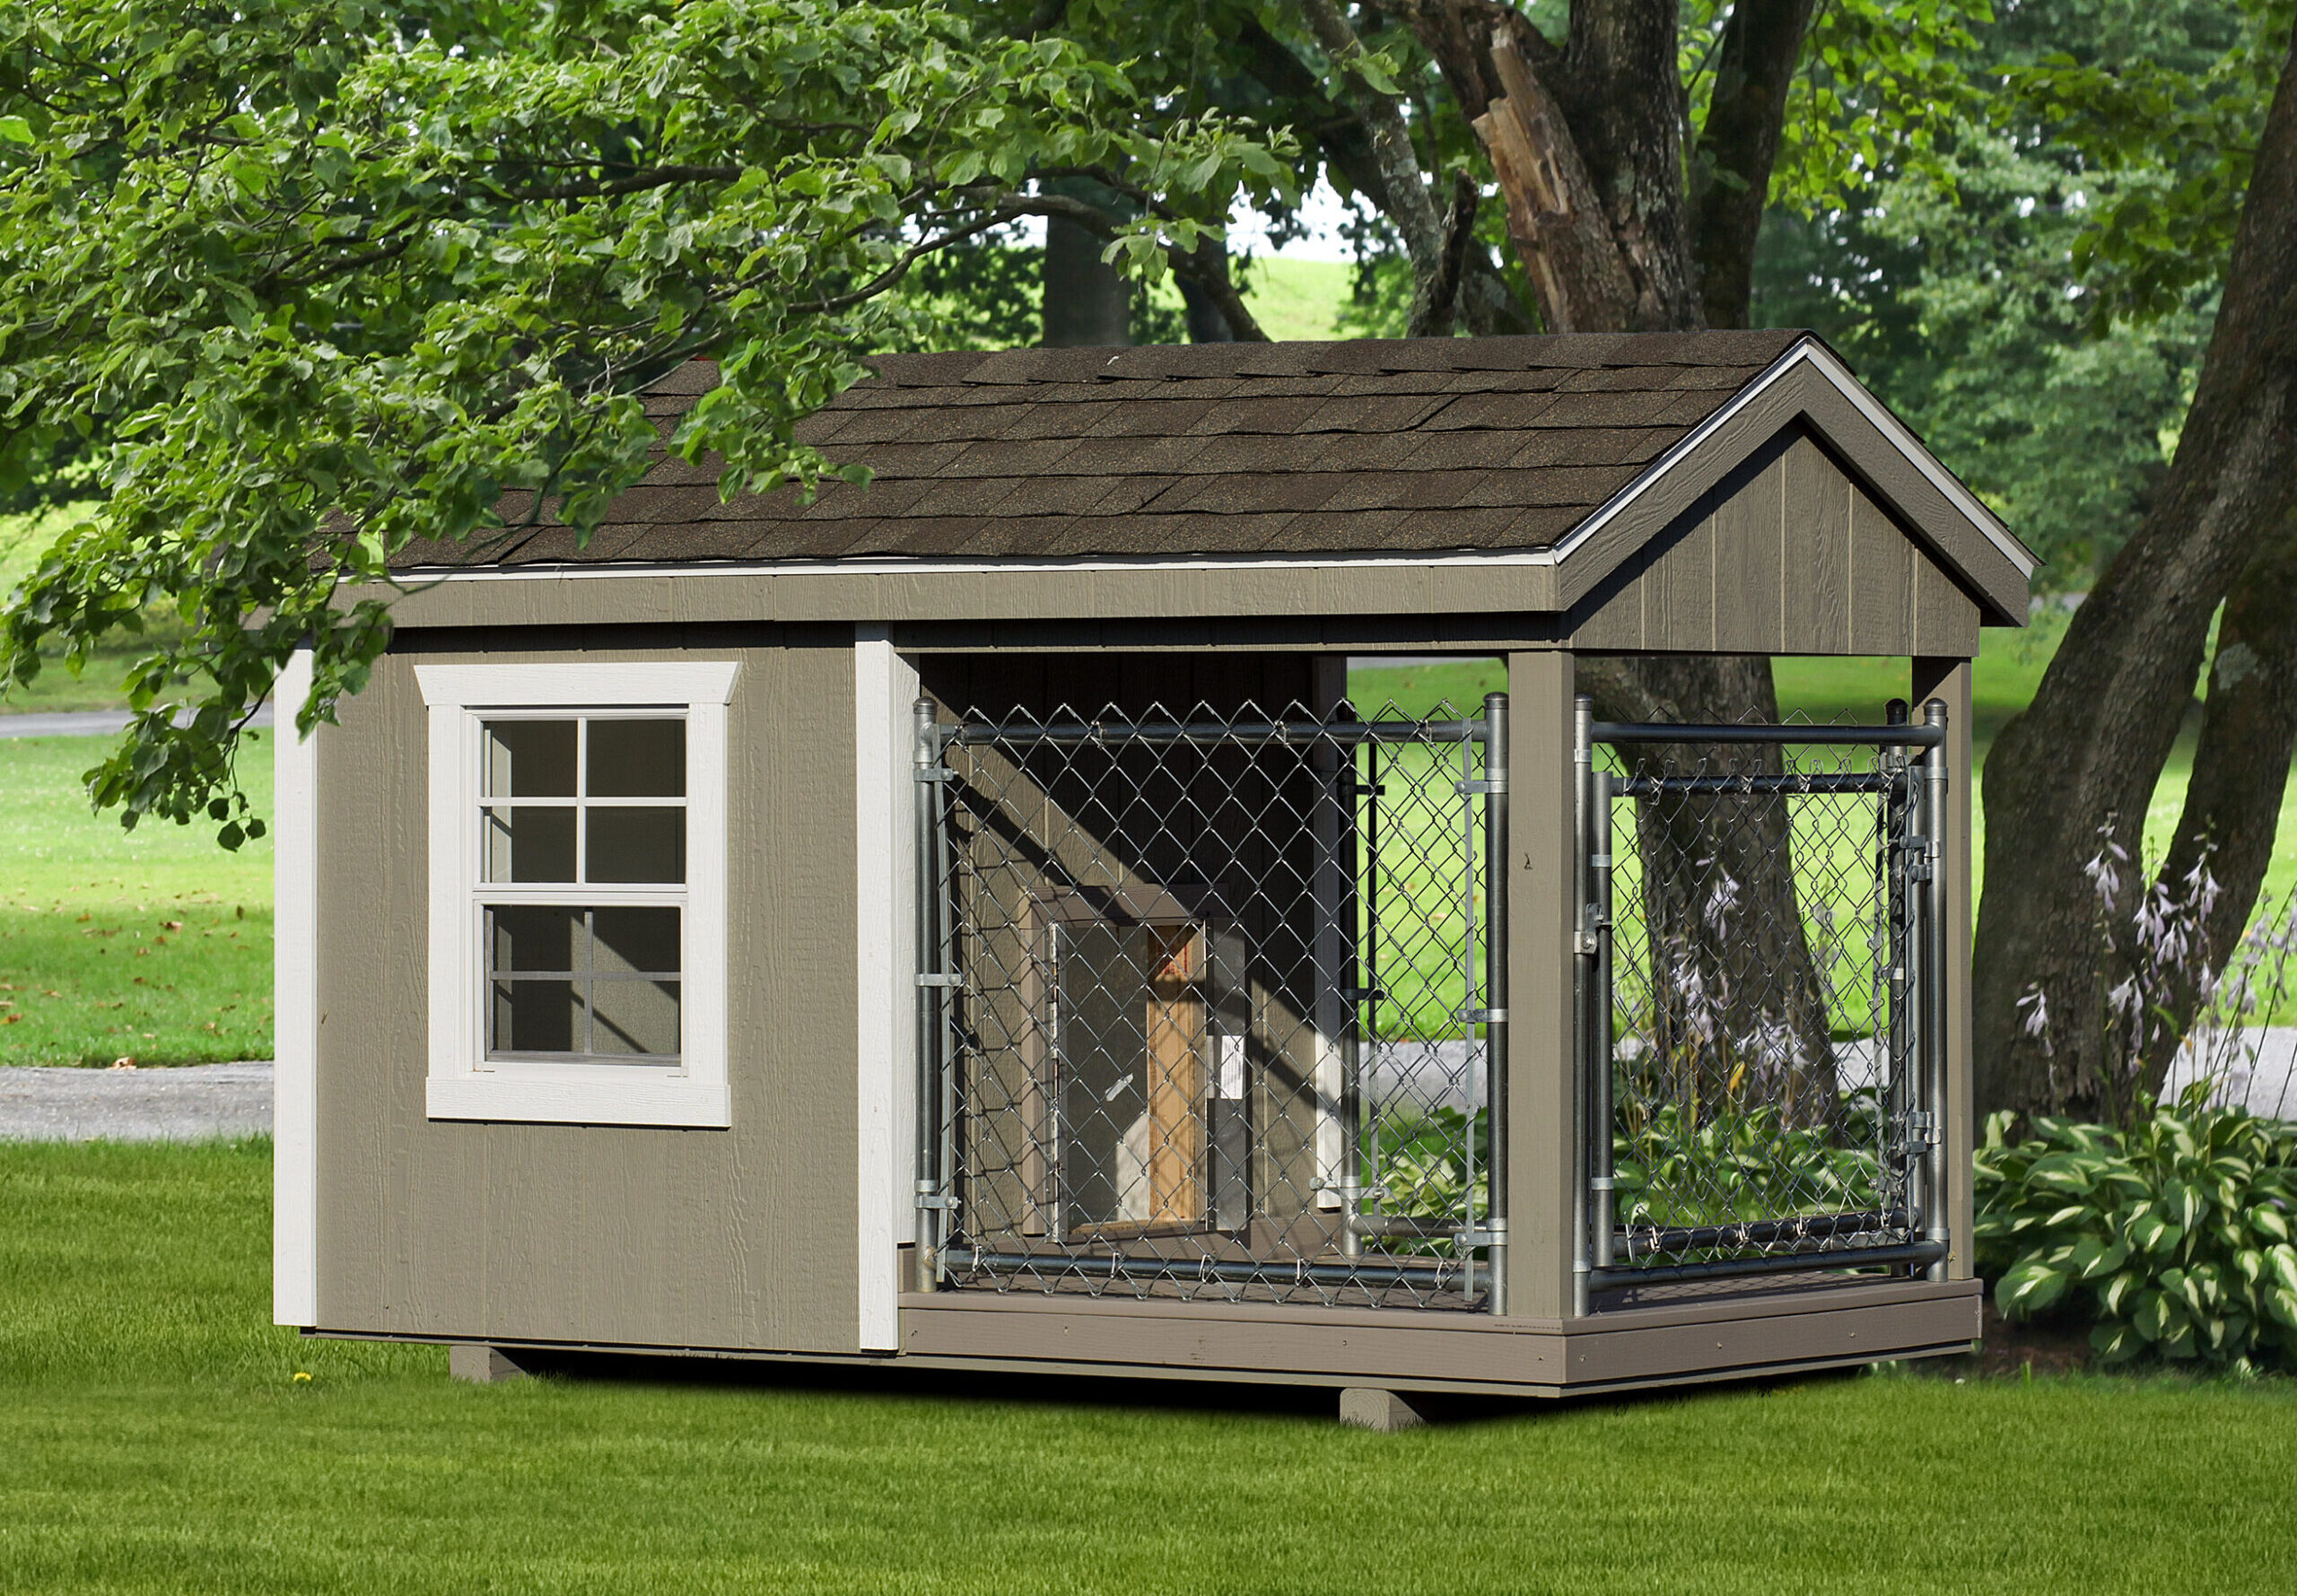 Front view of a 4x8 single capacity dog kennel with tan LP siding and white trim